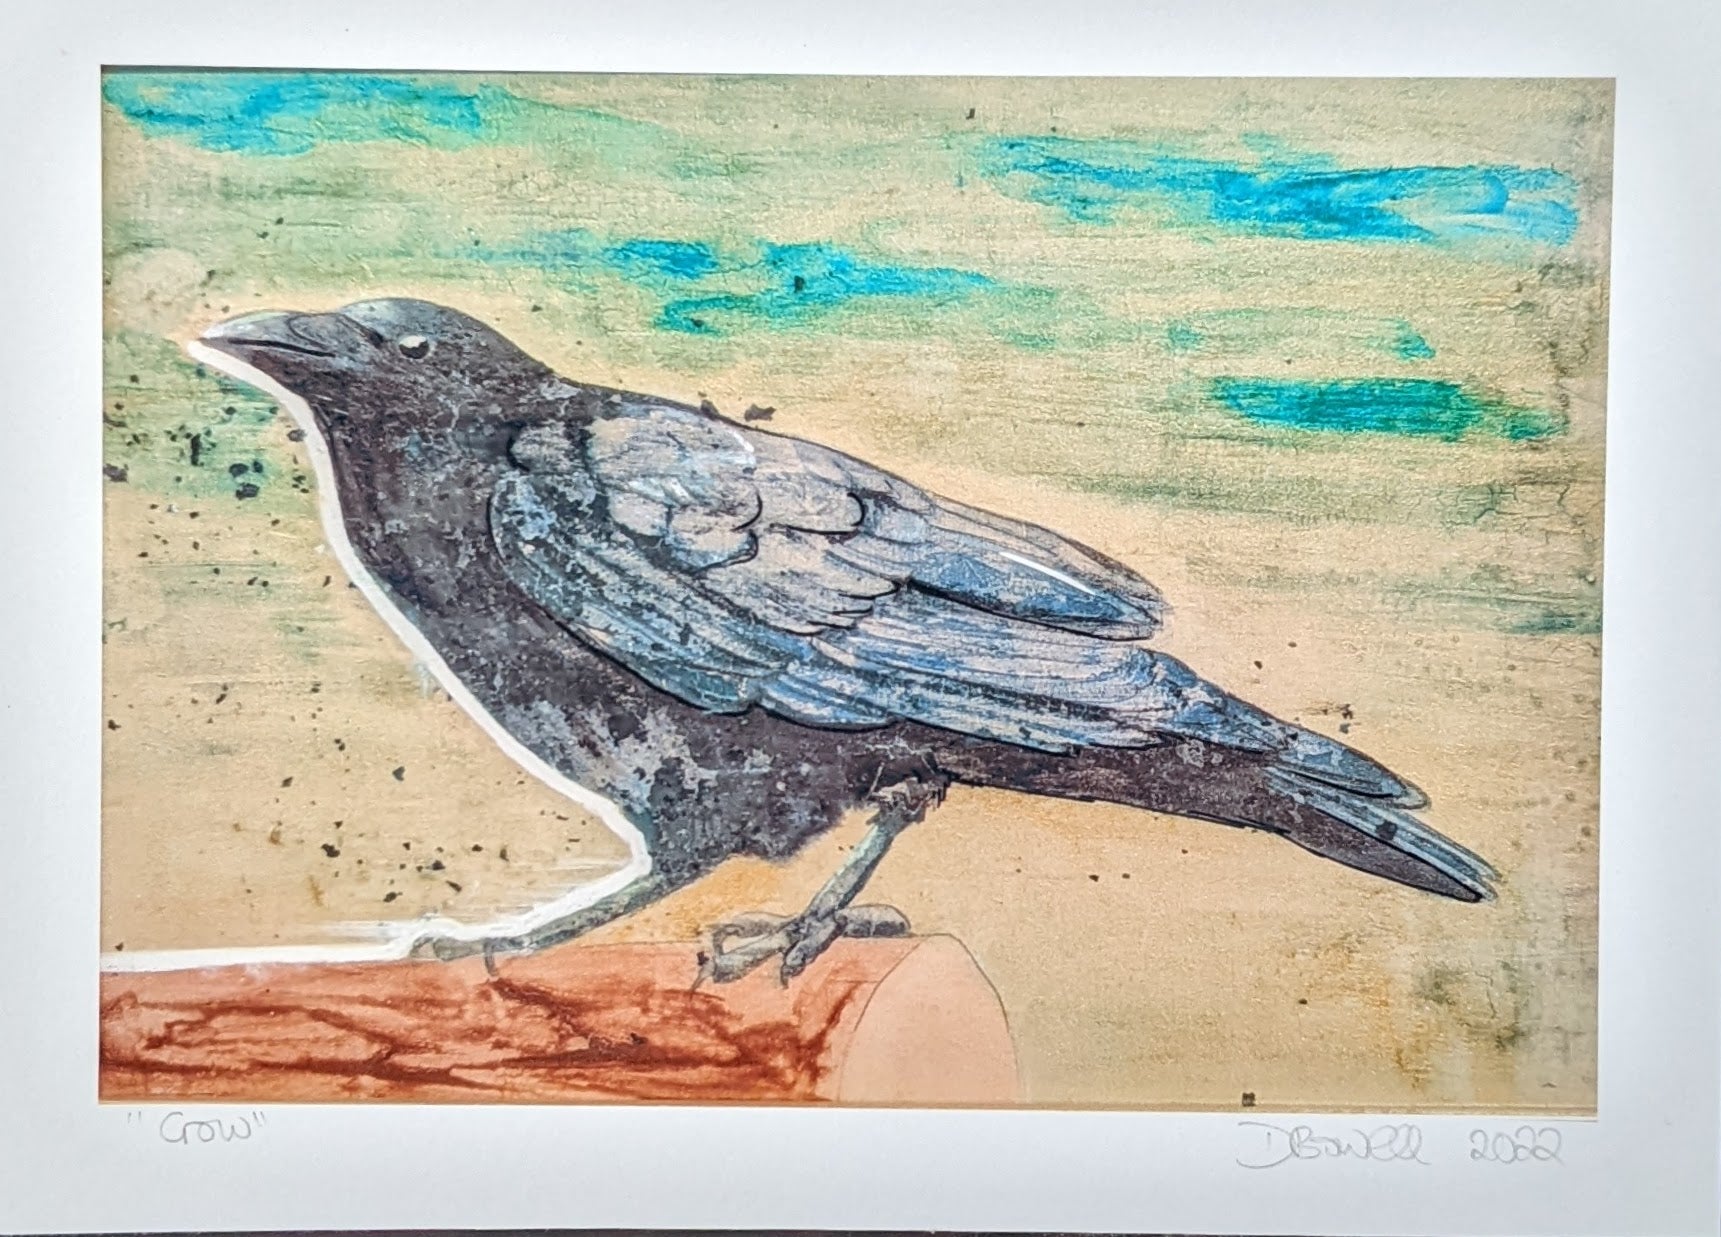 Print of the painting CROW, By British female artist Dianne Bowell, available in A4 or A5. Crow, corvid, artwork.